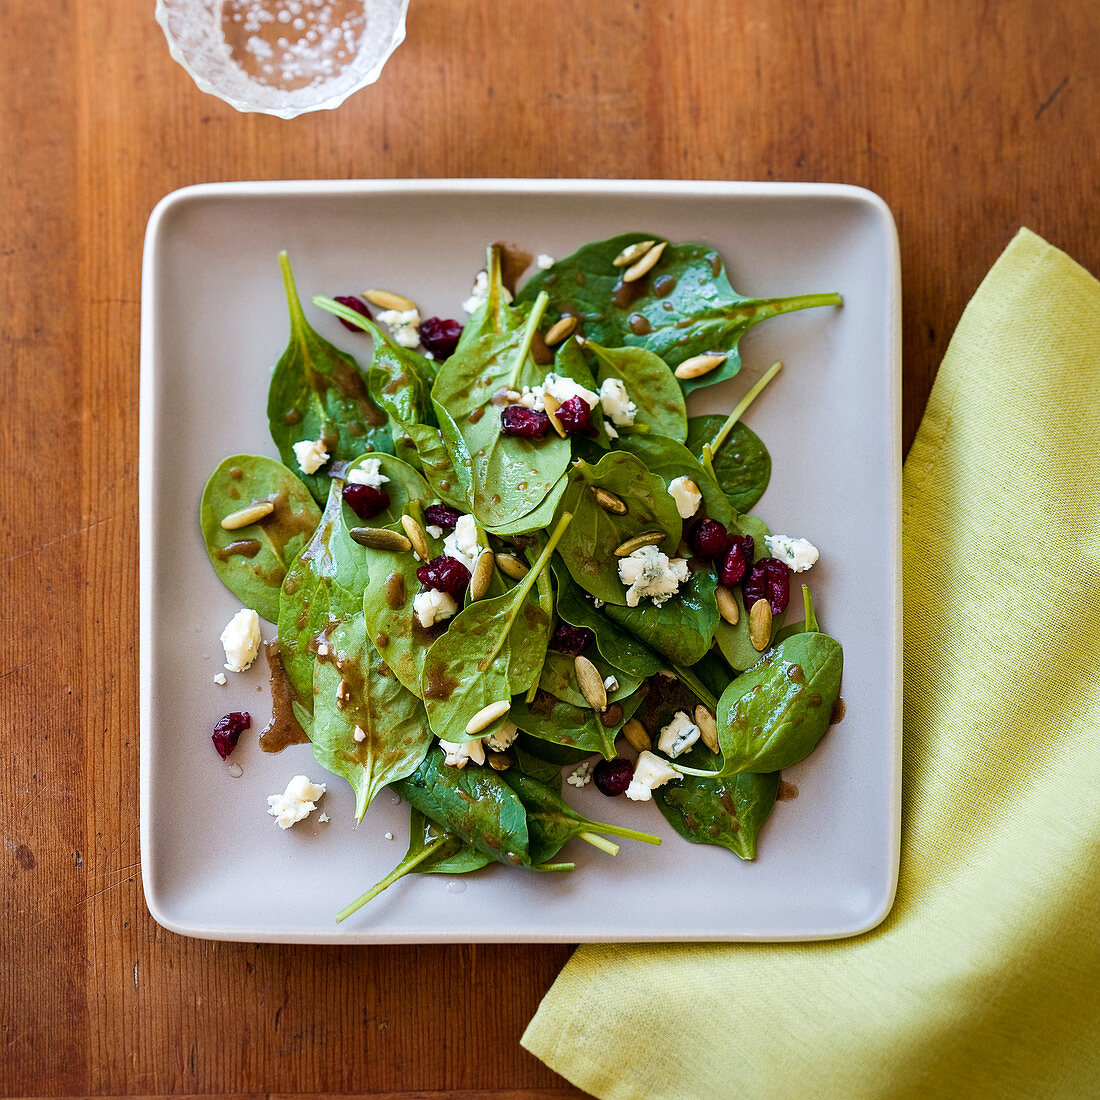 Spinach salad with gorgonzola, pine nuts and pomegranate seeds